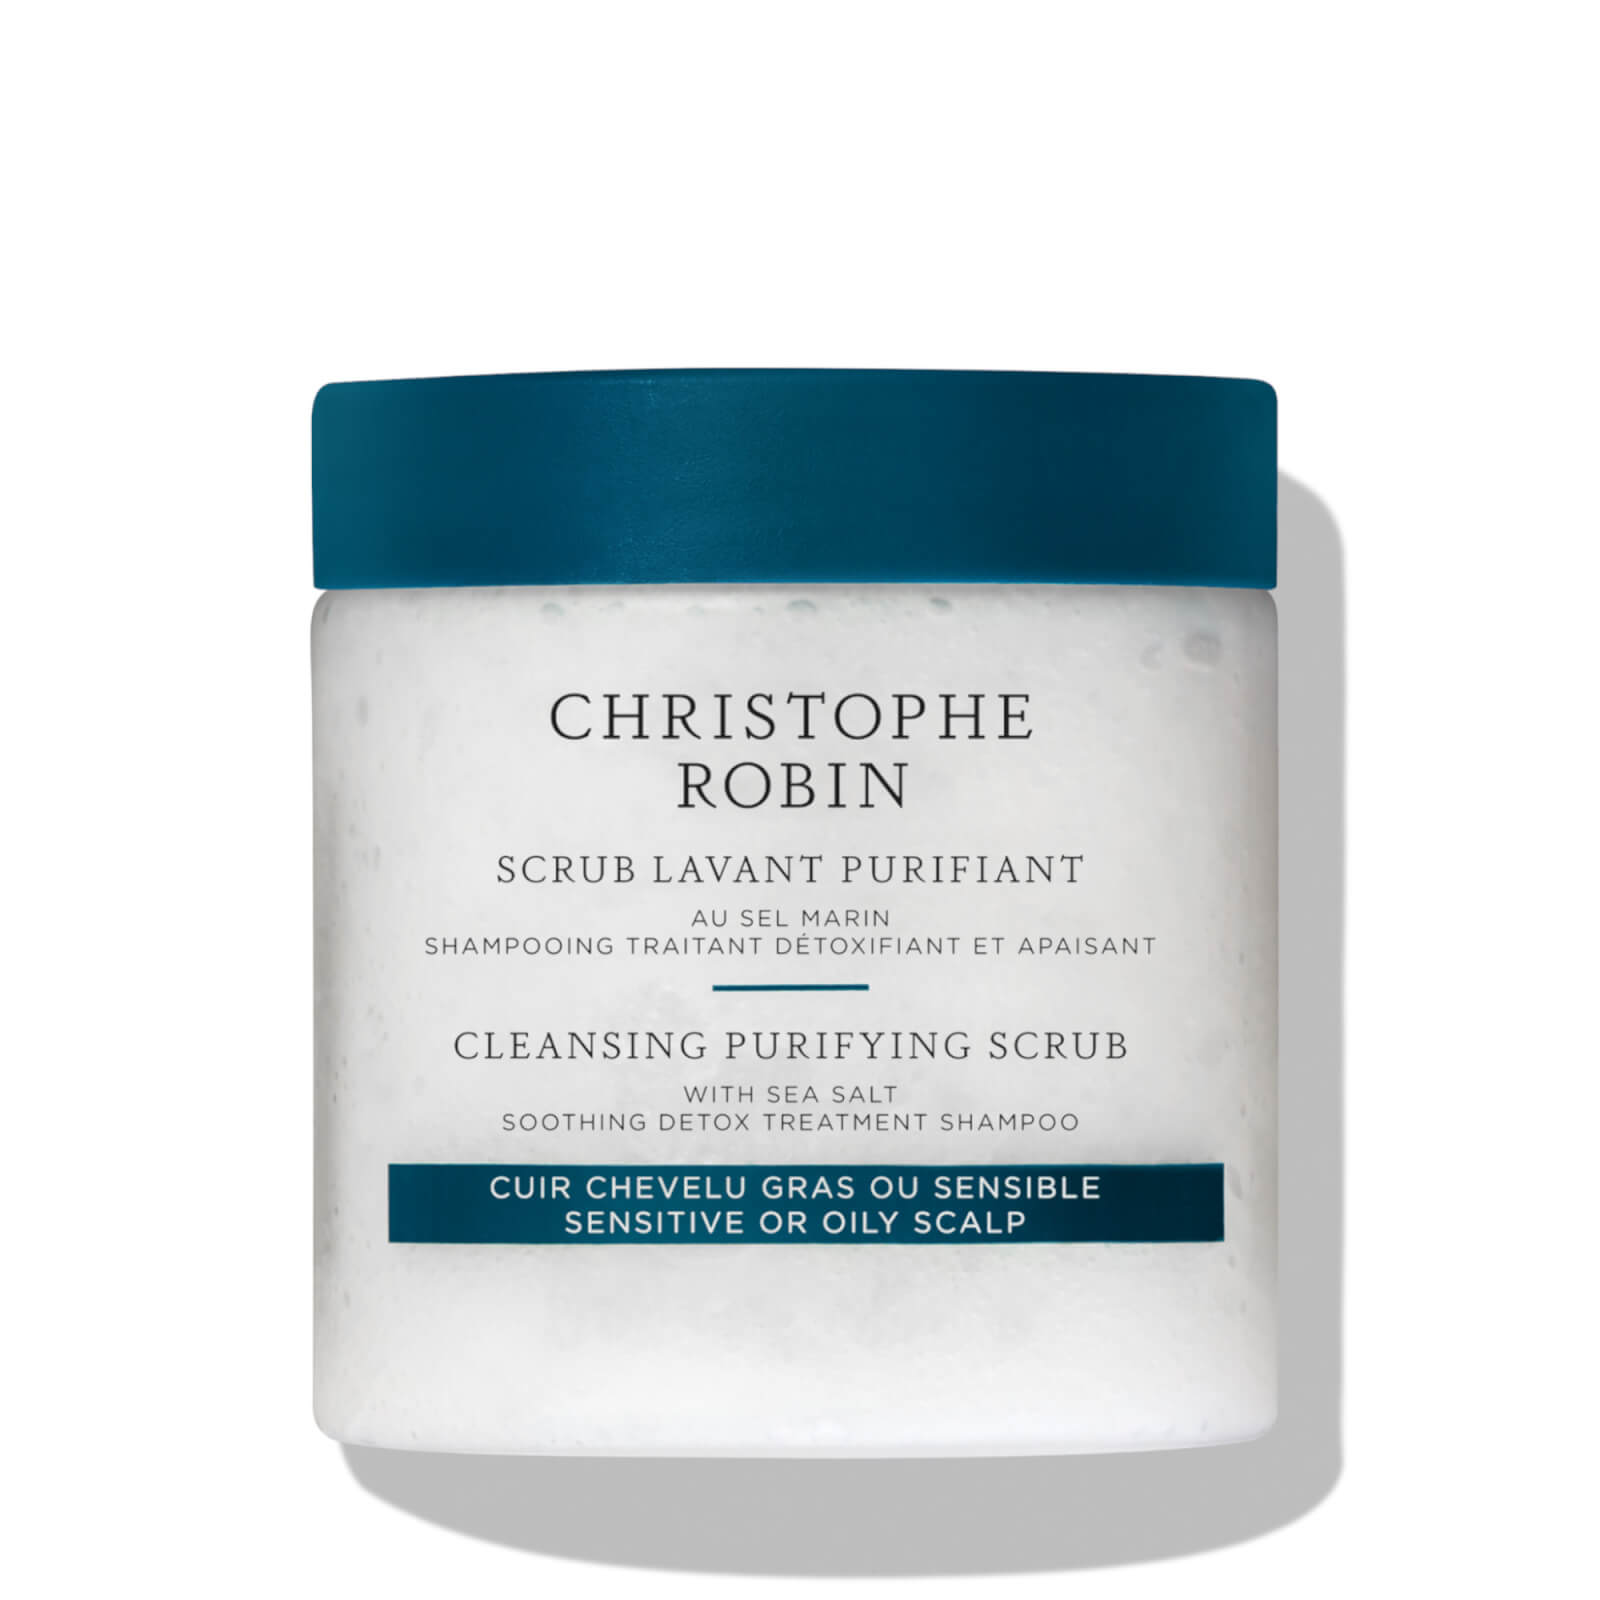 Photos - Facial / Body Cleansing Product Cleansing Purifying Scrub with Sea Salt 75ml